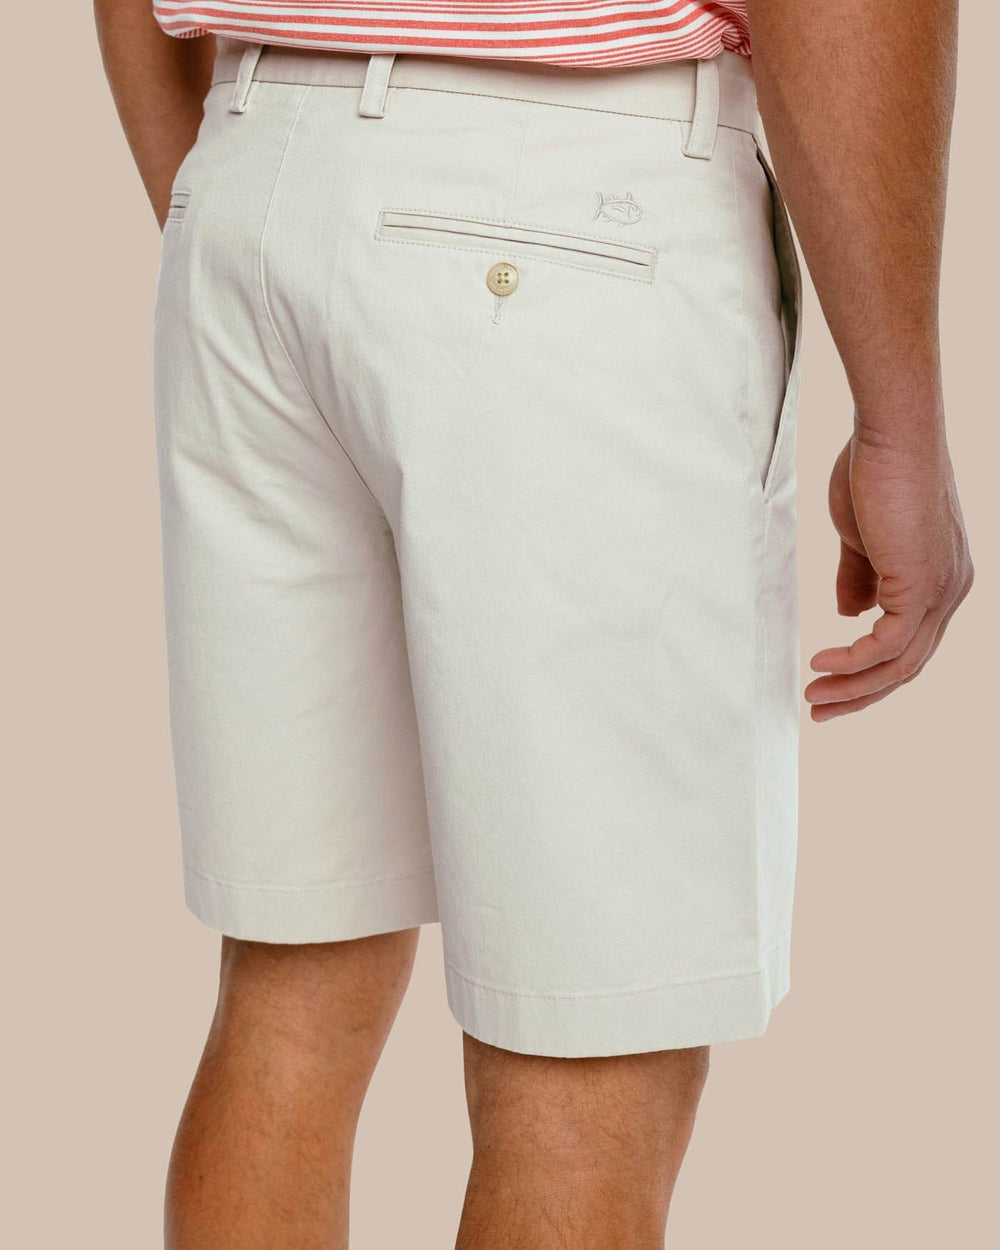 The back view of the Men's New Channel Marker 9 Inch Short by Southern Tide - Light Khaki